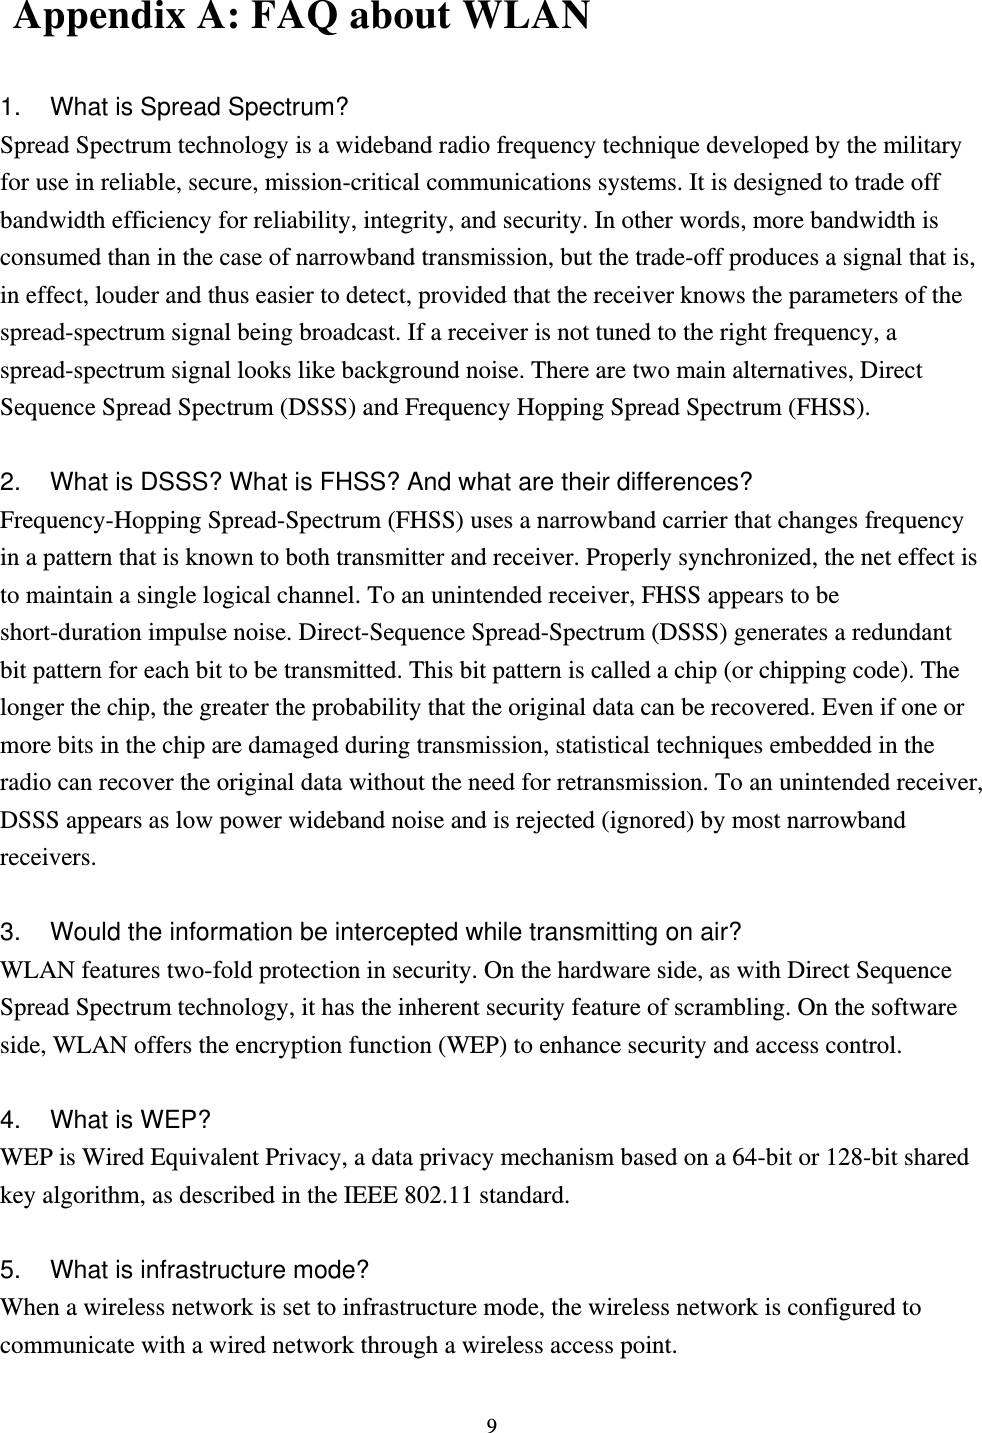  9  Appendix A: FAQ about WLAN  1.  What is Spread Spectrum? Spread Spectrum technology is a wideband radio frequency technique developed by the military for use in reliable, secure, mission-critical communications systems. It is designed to trade off bandwidth efficiency for reliability, integrity, and security. In other words, more bandwidth is consumed than in the case of narrowband transmission, but the trade-off produces a signal that is, in effect, louder and thus easier to detect, provided that the receiver knows the parameters of the spread-spectrum signal being broadcast. If a receiver is not tuned to the right frequency, a spread-spectrum signal looks like background noise. There are two main alternatives, Direct Sequence Spread Spectrum (DSSS) and Frequency Hopping Spread Spectrum (FHSS).  2.  What is DSSS? What is FHSS? And what are their differences? Frequency-Hopping Spread-Spectrum (FHSS) uses a narrowband carrier that changes frequency in a pattern that is known to both transmitter and receiver. Properly synchronized, the net effect is to maintain a single logical channel. To an unintended receiver, FHSS appears to be short-duration impulse noise. Direct-Sequence Spread-Spectrum (DSSS) generates a redundant bit pattern for each bit to be transmitted. This bit pattern is called a chip (or chipping code). The longer the chip, the greater the probability that the original data can be recovered. Even if one or more bits in the chip are damaged during transmission, statistical techniques embedded in the radio can recover the original data without the need for retransmission. To an unintended receiver, DSSS appears as low power wideband noise and is rejected (ignored) by most narrowband receivers.  3.  Would the information be intercepted while transmitting on air? WLAN features two-fold protection in security. On the hardware side, as with Direct Sequence Spread Spectrum technology, it has the inherent security feature of scrambling. On the software side, WLAN offers the encryption function (WEP) to enhance security and access control.  4.  What is WEP? WEP is Wired Equivalent Privacy, a data privacy mechanism based on a 64-bit or 128-bit shared key algorithm, as described in the IEEE 802.11 standard.    5.  What is infrastructure mode? When a wireless network is set to infrastructure mode, the wireless network is configured to communicate with a wired network through a wireless access point. 